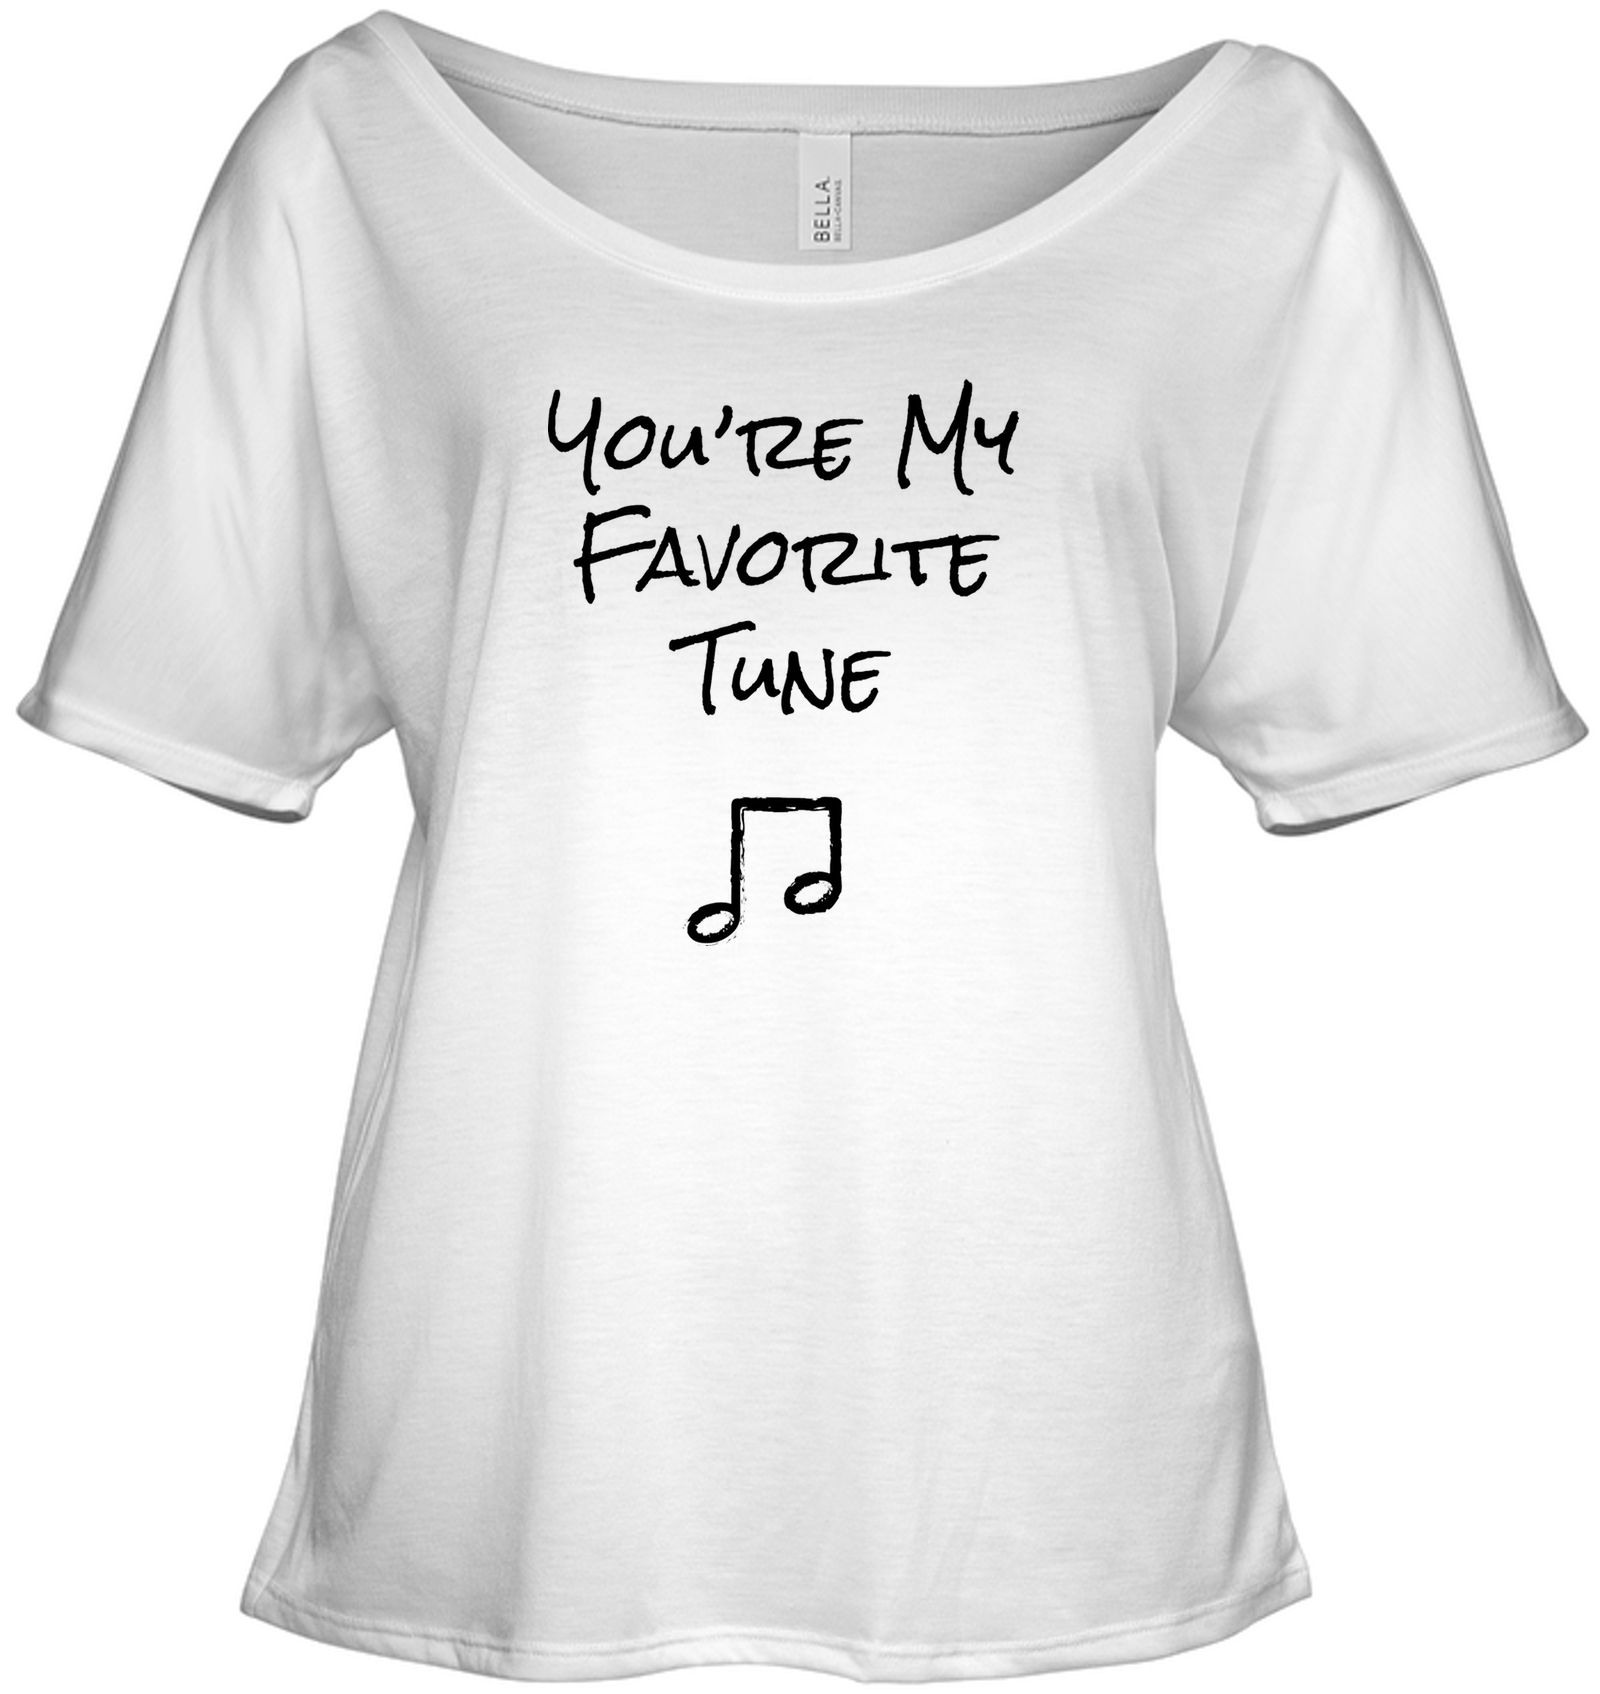 You're My Favorite Tune - Bella + Canvas Women's Slouchy Tee